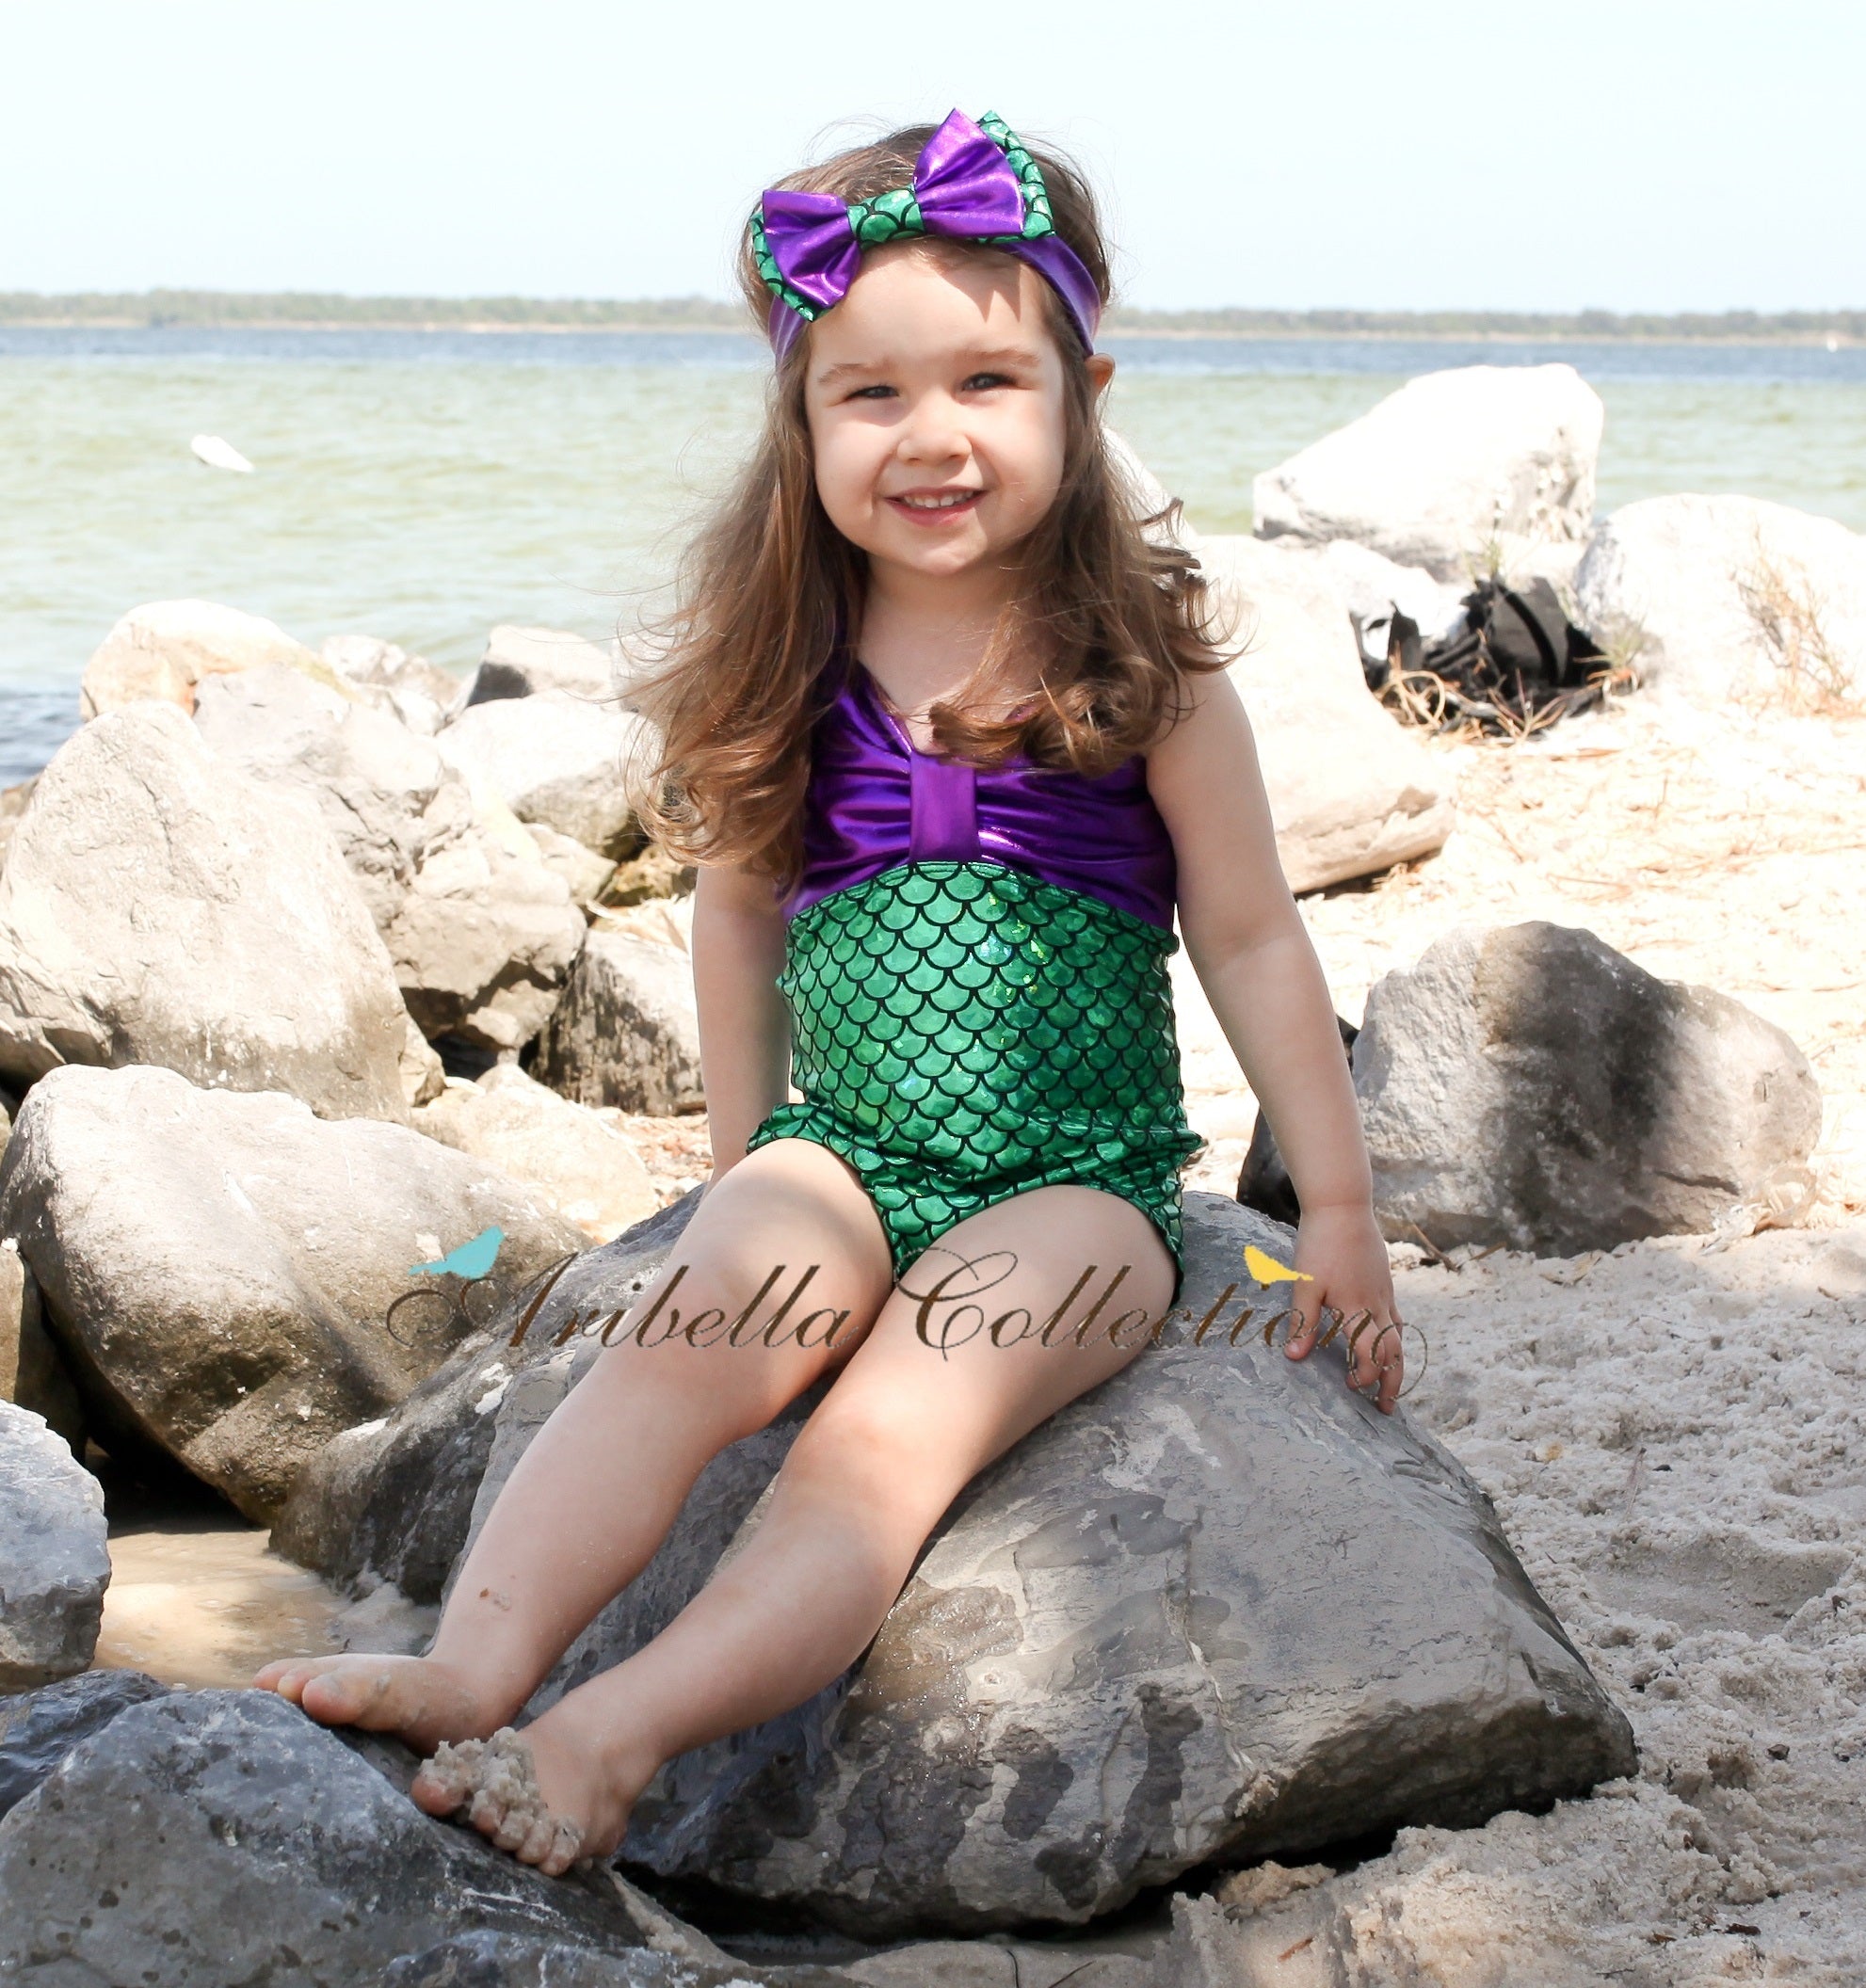 Mermaid Skirt & One Piece Swimsuit Outfit - Iridescent, Green, or Aqua –  Aribella Collection, Inc.